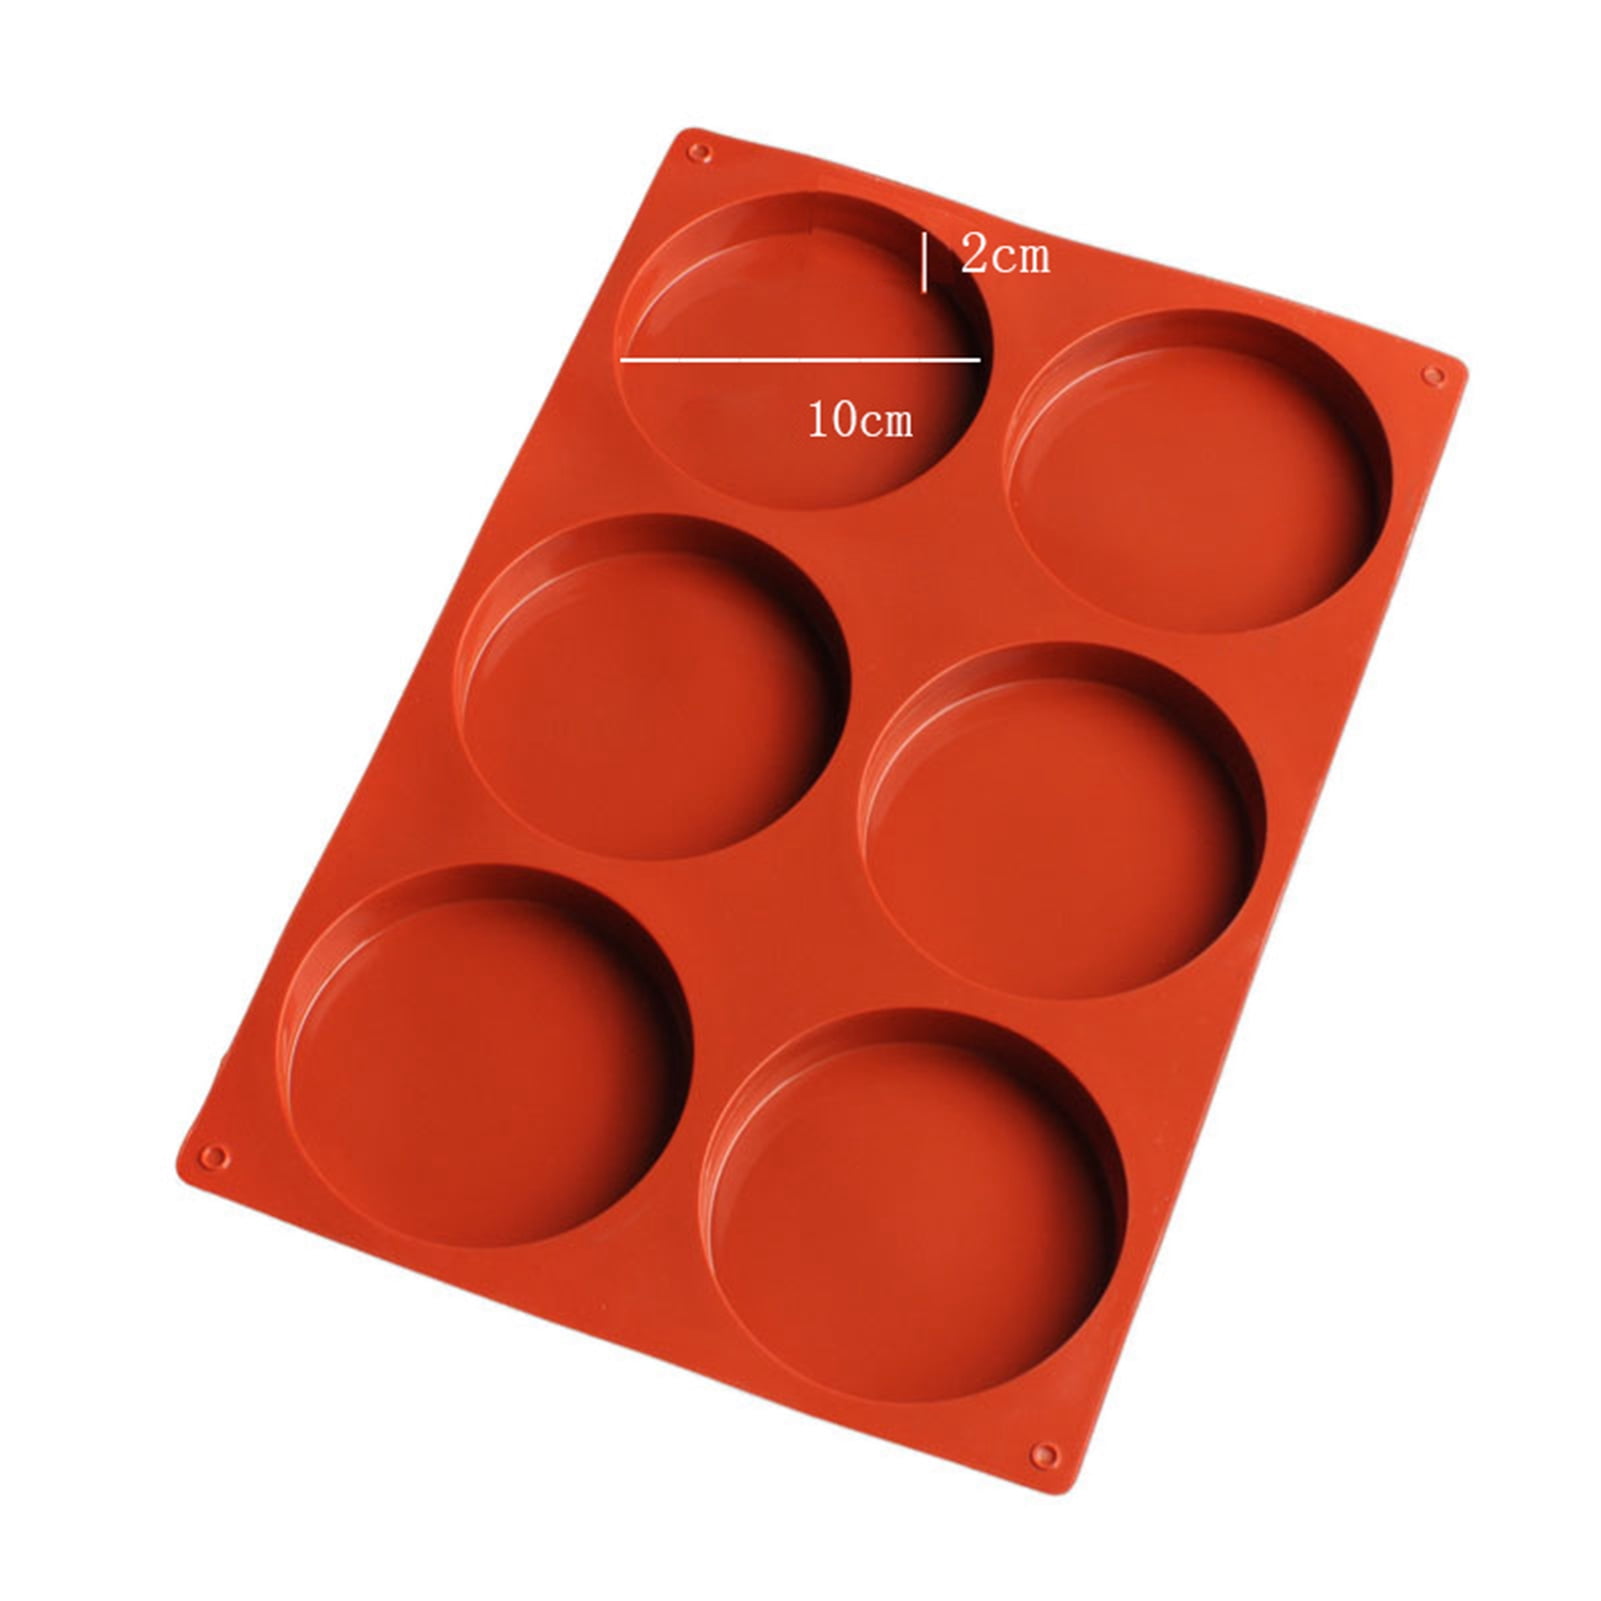 1PC Round Silicone Mold Nonstick Baking Pan Layer Cake Mould Bakeware  Chocolate Pastry Tools Kitchen Accessories 4/6/8/10 Inch - AliExpress